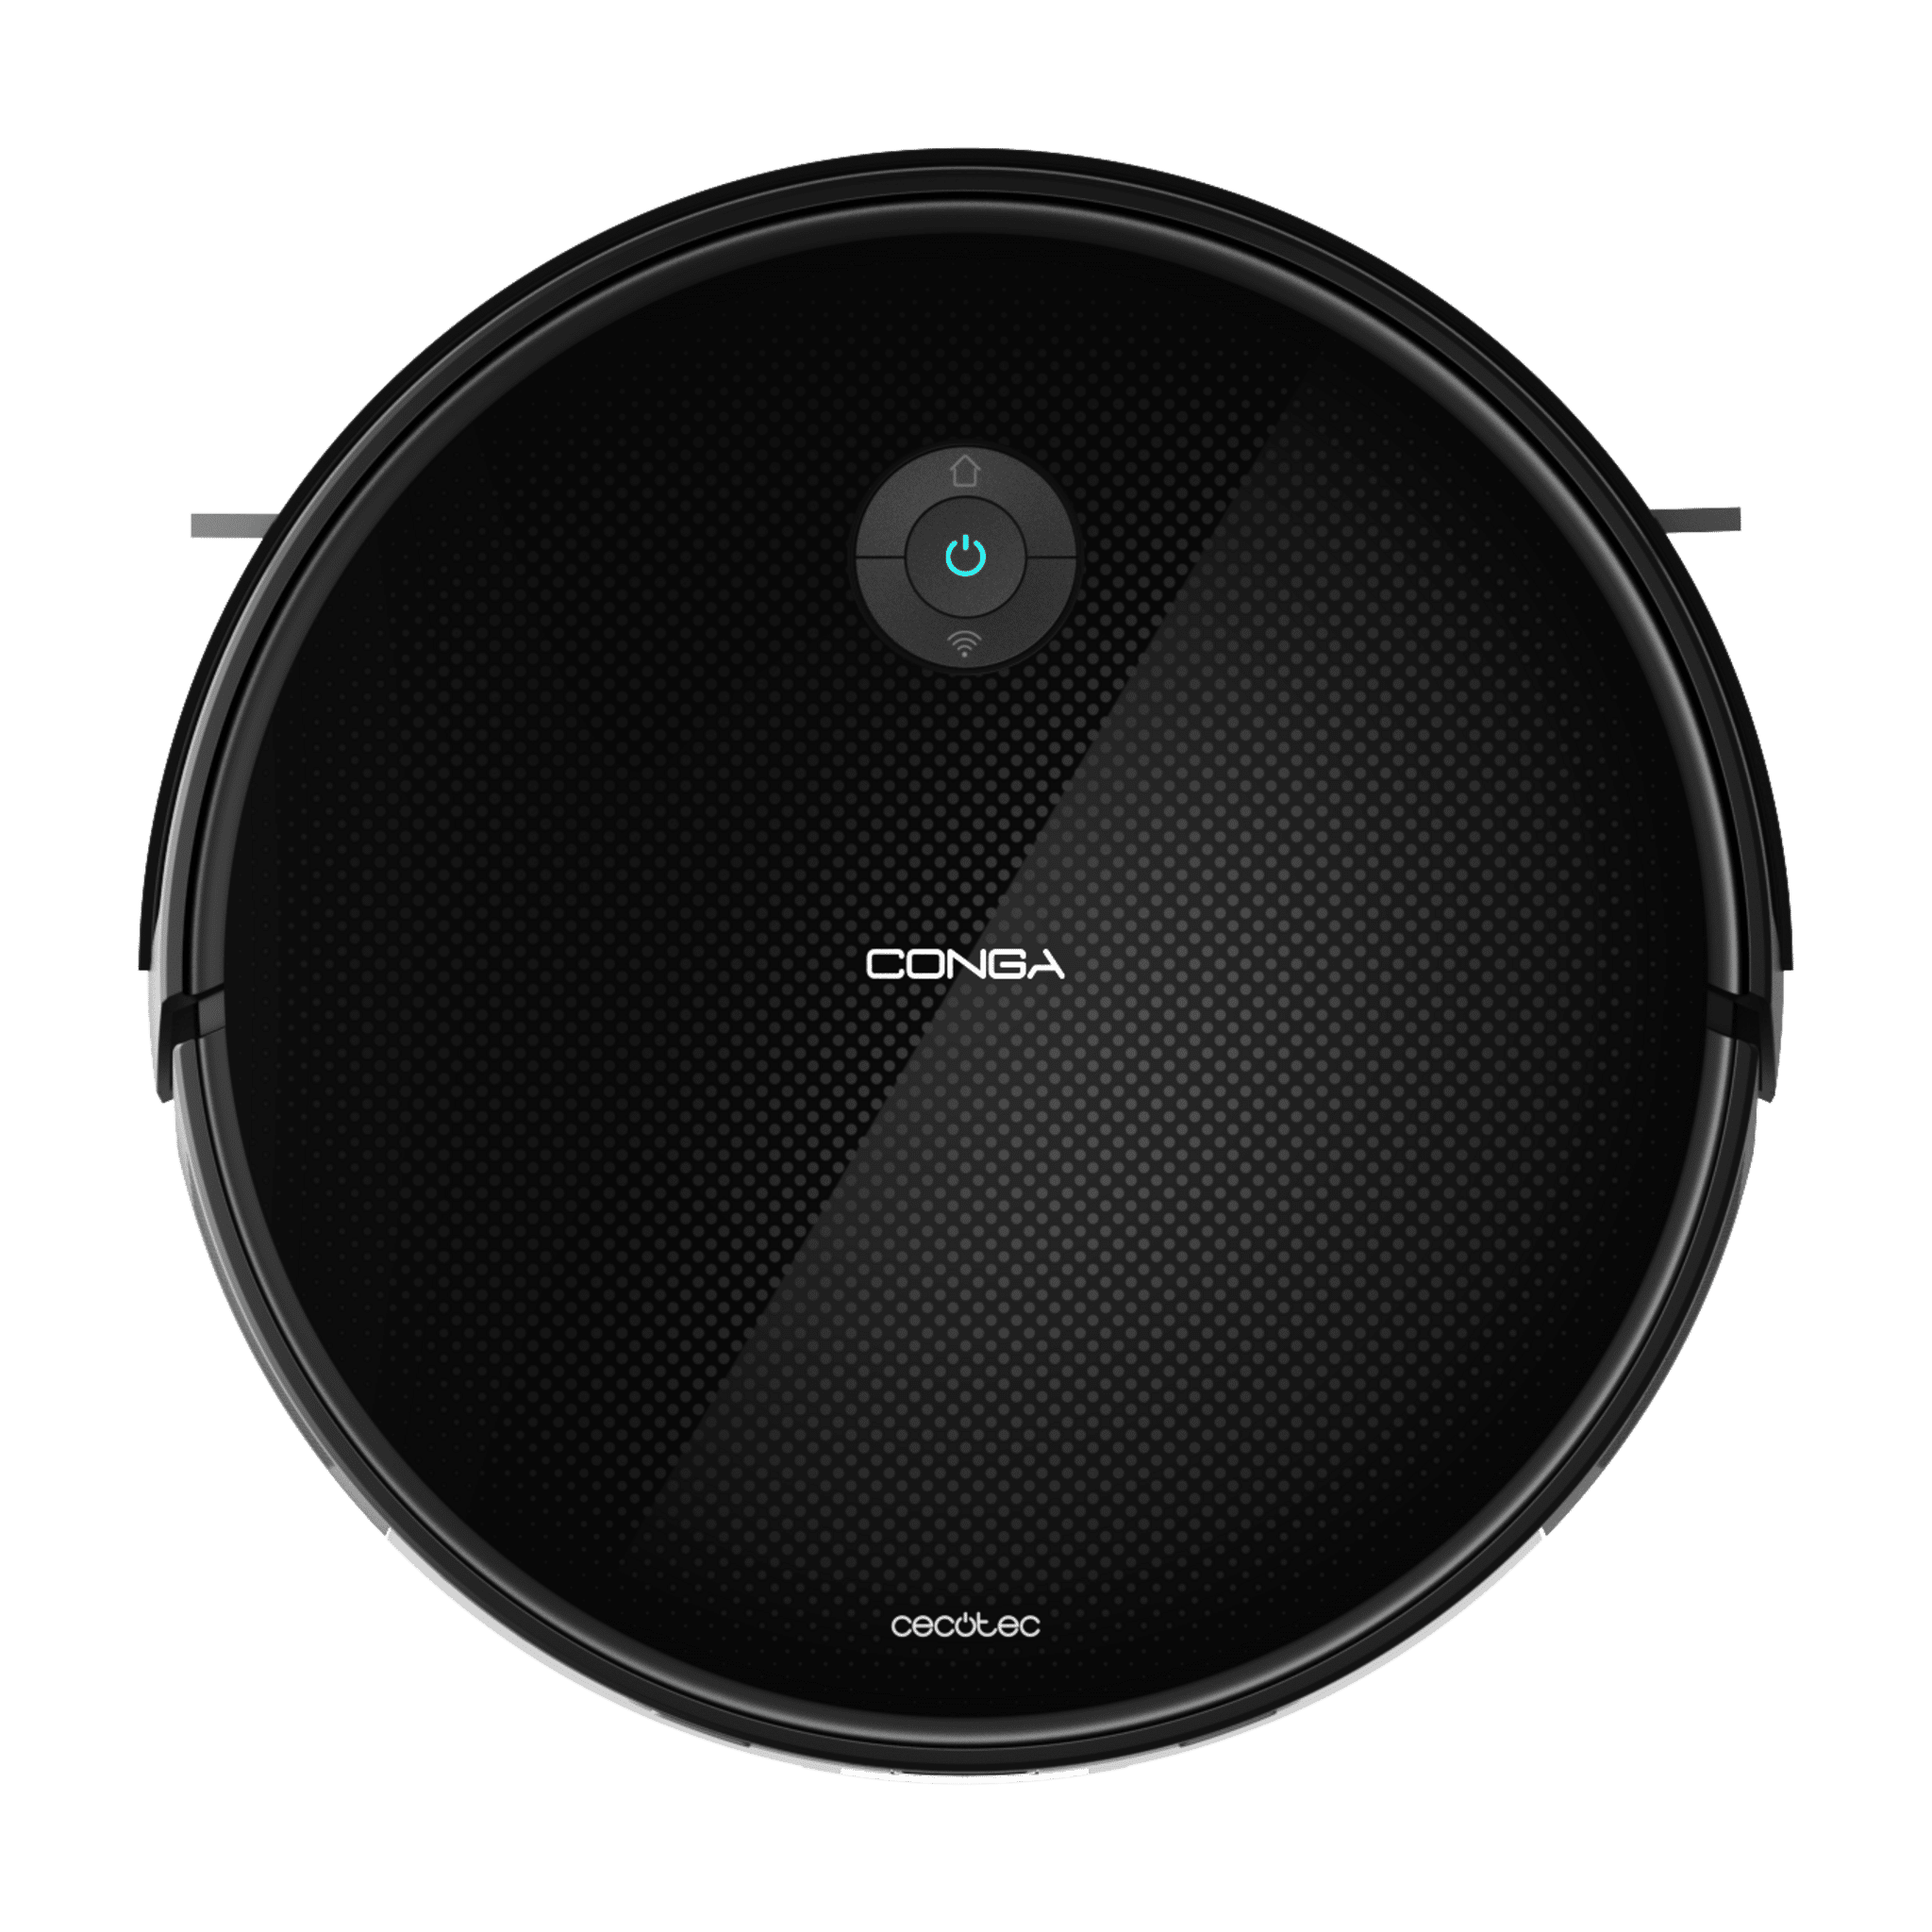 Cecotec Robot Vacuum Cleaner with Self-emptying Base Conga 2499